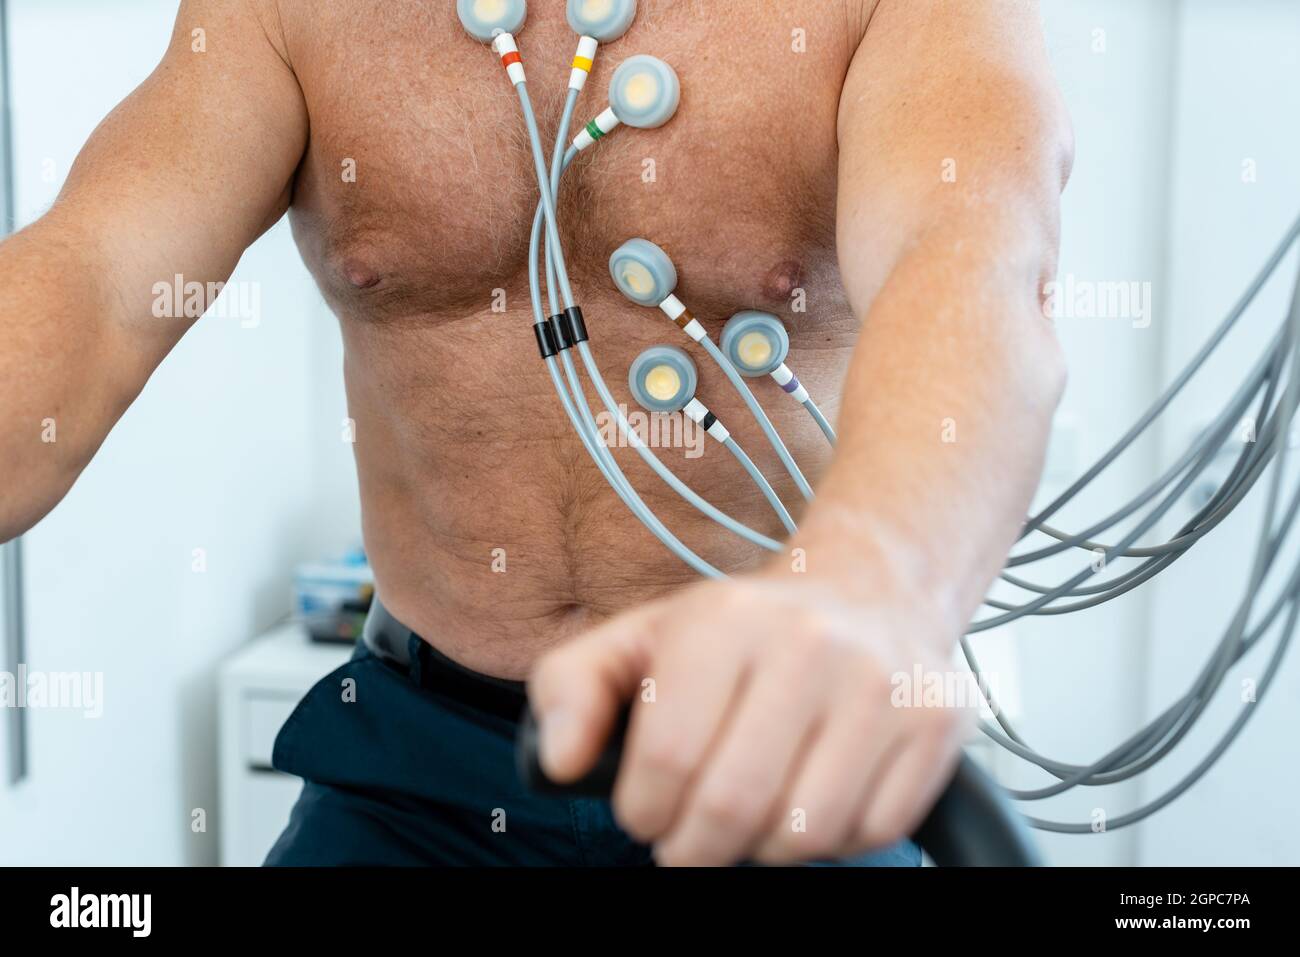 Patient on exercise bike with electrodes during stress ECG Stock Photo